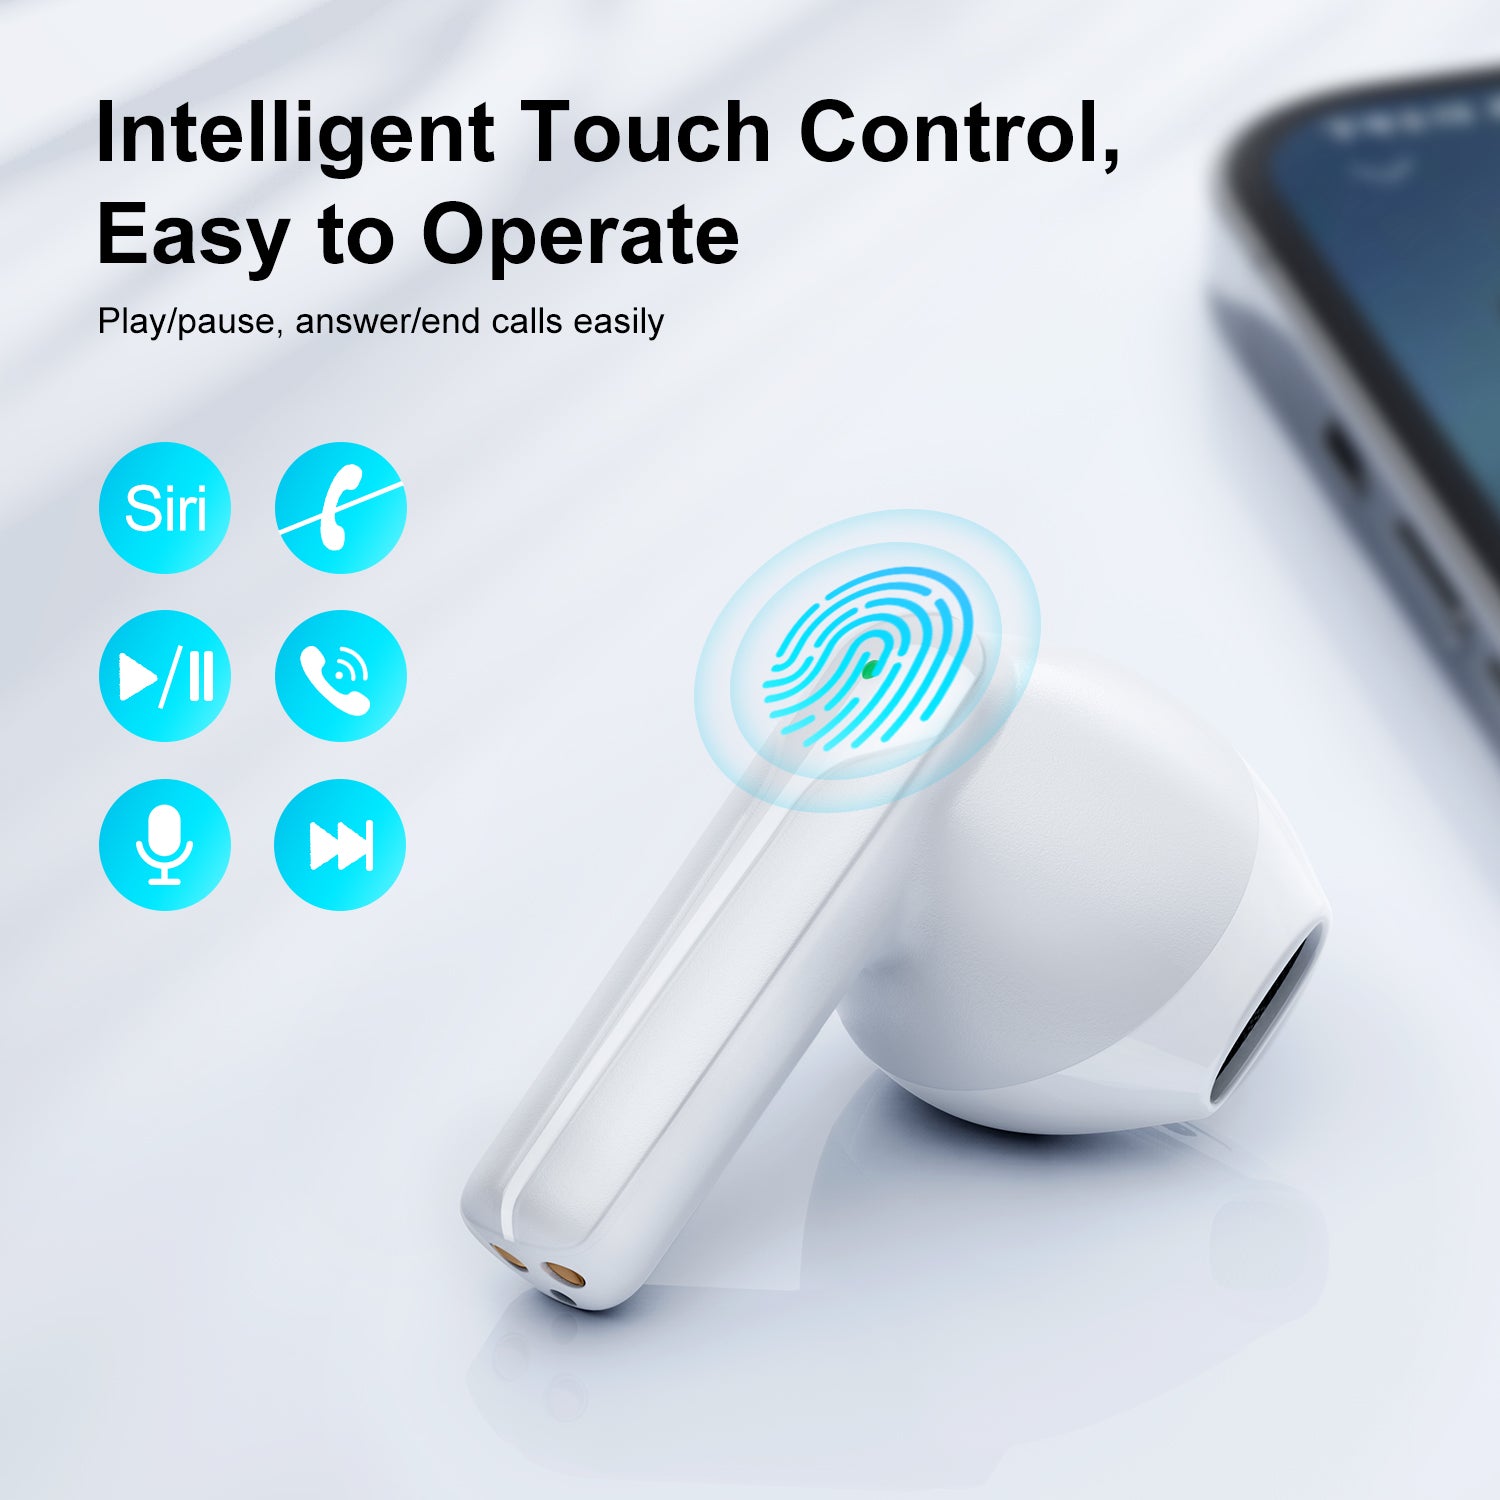 Intelligent Touch Control, Easy to Operate